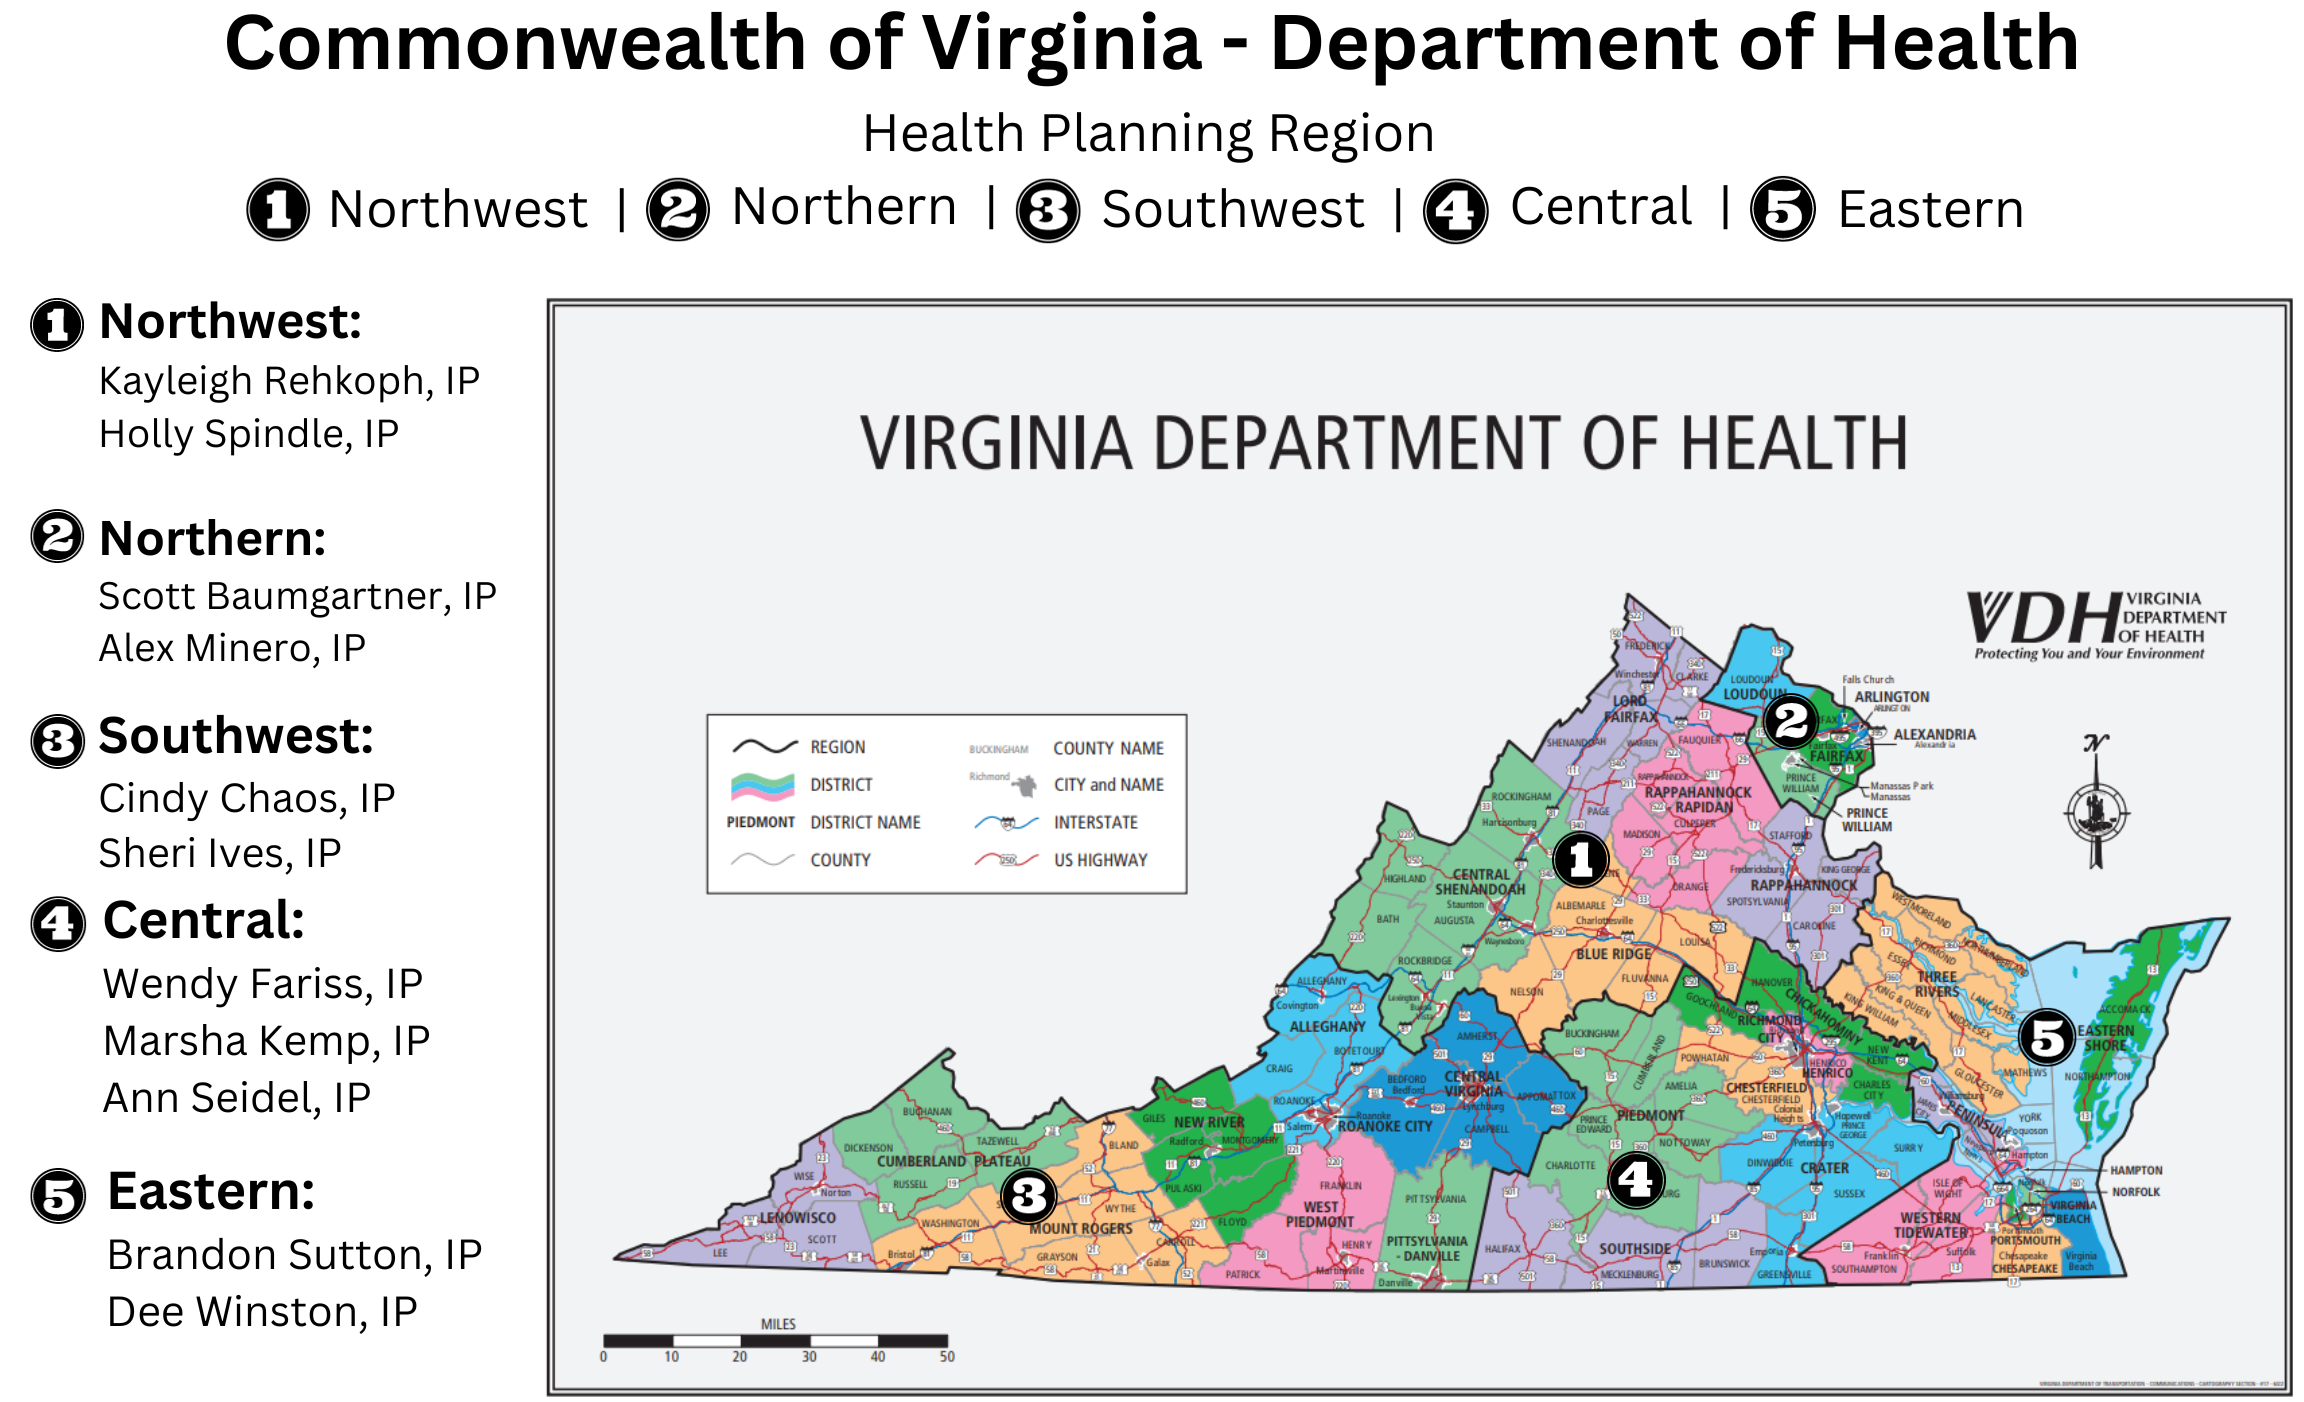 Commonwealth of Virginia - Department of Health, Health Planning Regions. 
Northwest
Northern
Southwest
Central
Eastern